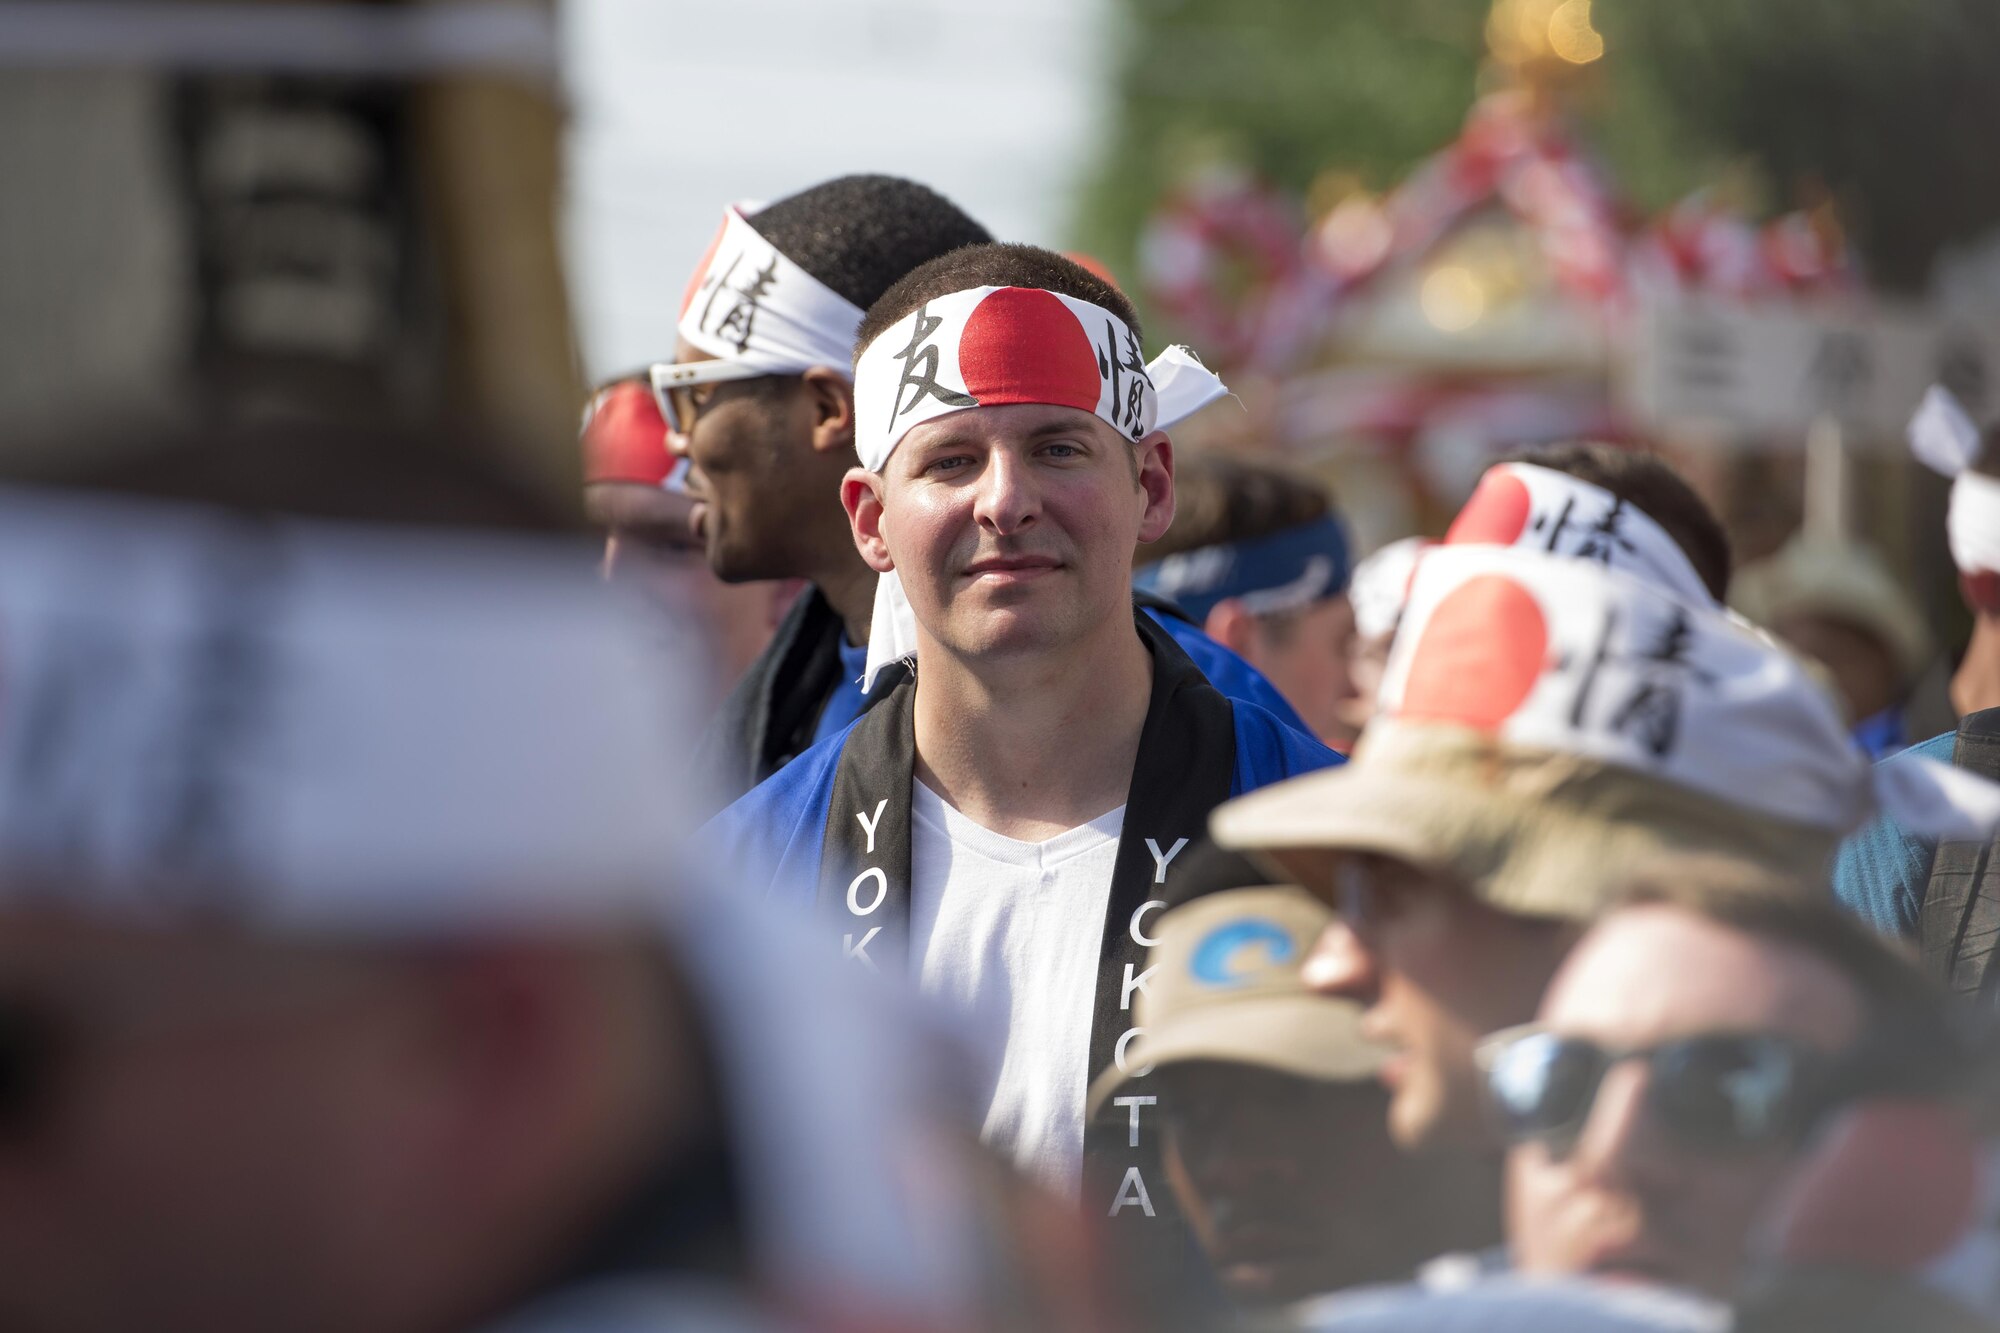 An Airman from Yokota Air Base takes a break from carrying a mikoshi, or portable shrine, during the 66th Annual Fussa Tanabata Festival at Fussa City, Japan, Aug. 5, 2016. Nearly 100 members of Yokota participated in carrying the mikoshi, giving the Air Force base an active role in the Japanese festival. (U.S. Air Force photo by Staff Sgt. Cody H. Ramirez/Released)
